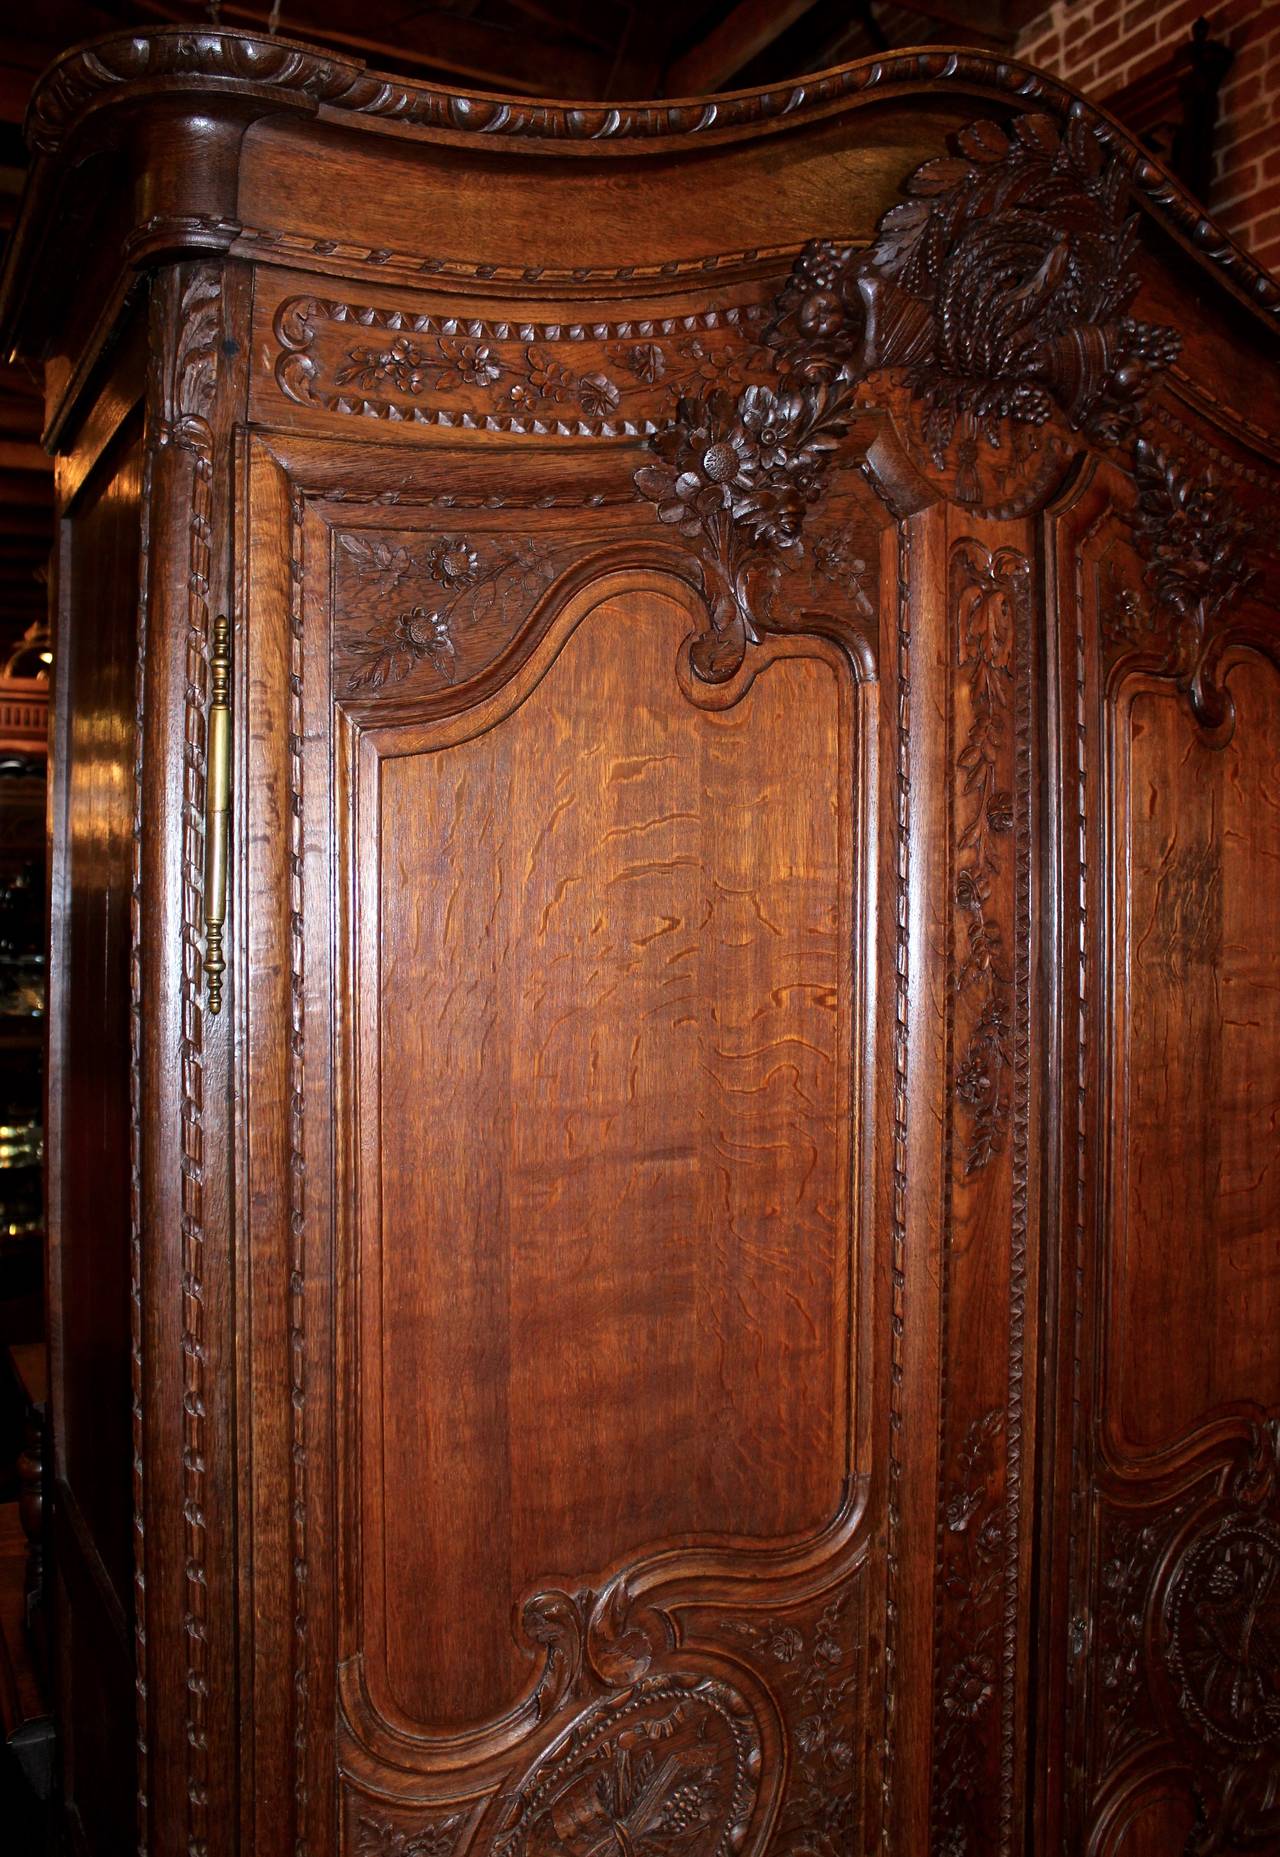 This French Period Armoire is made from oak.  The armoire features gorgeous, hand-carved details along its front and sides.  The two front doors swing open to reveal shelving storage which has been finished to an excellent condition.